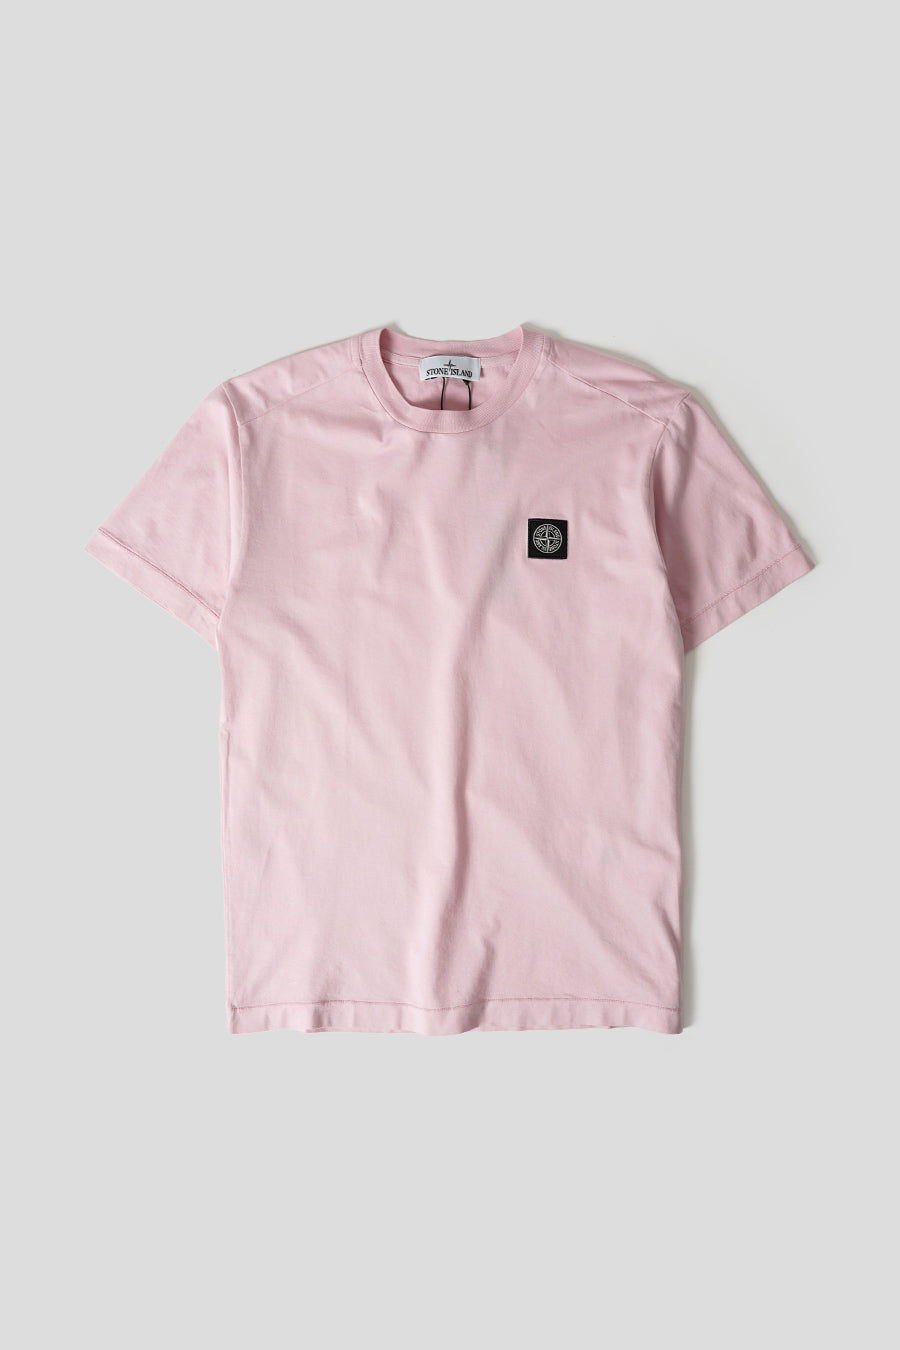 Stone Island - PINK PATCH T-SHIRT - LE LABO STORE